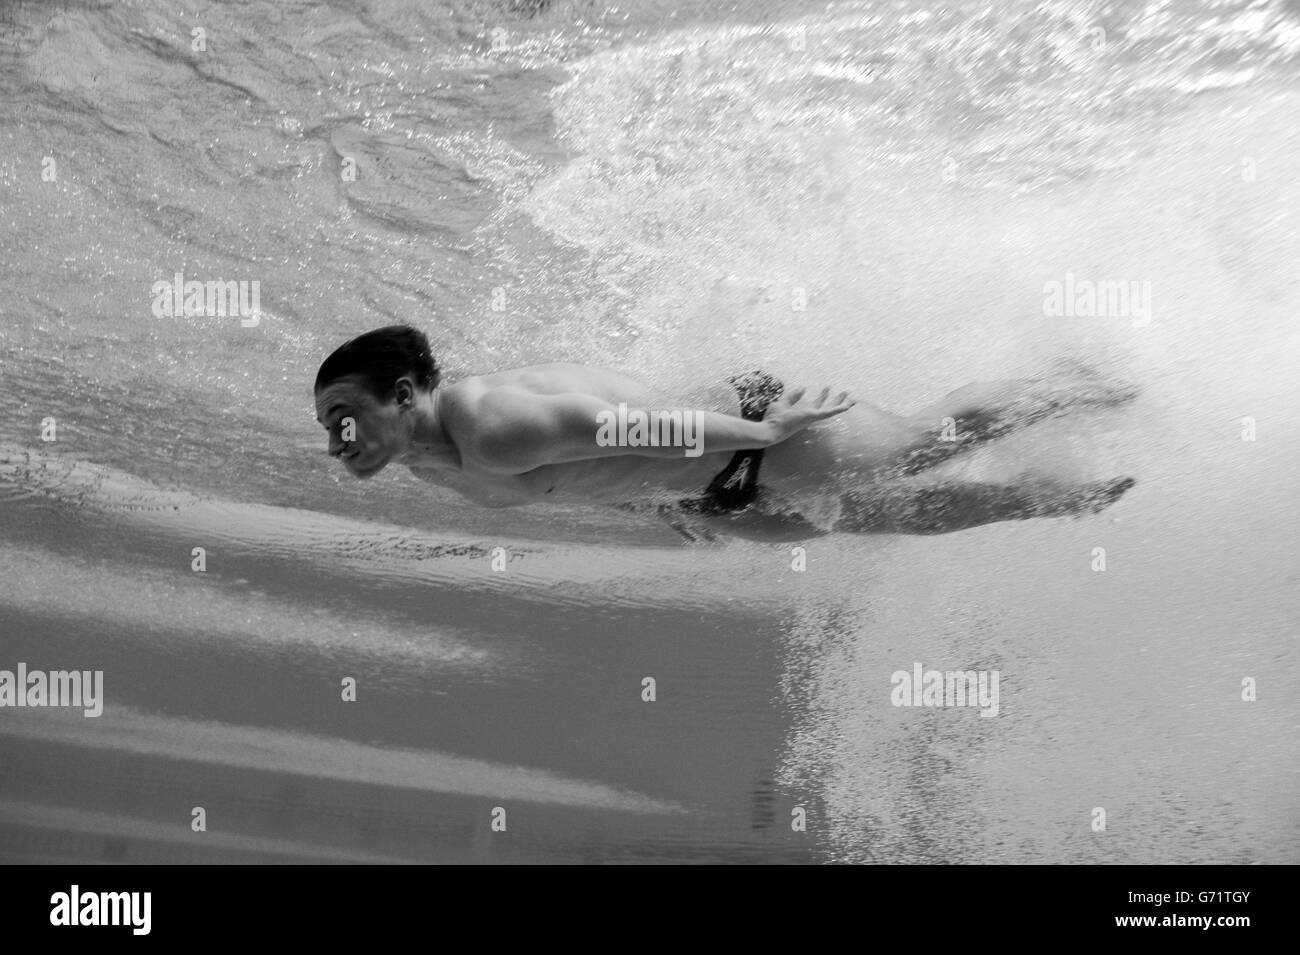 Springboard diving Black and White Stock Photos & Images - Alamy